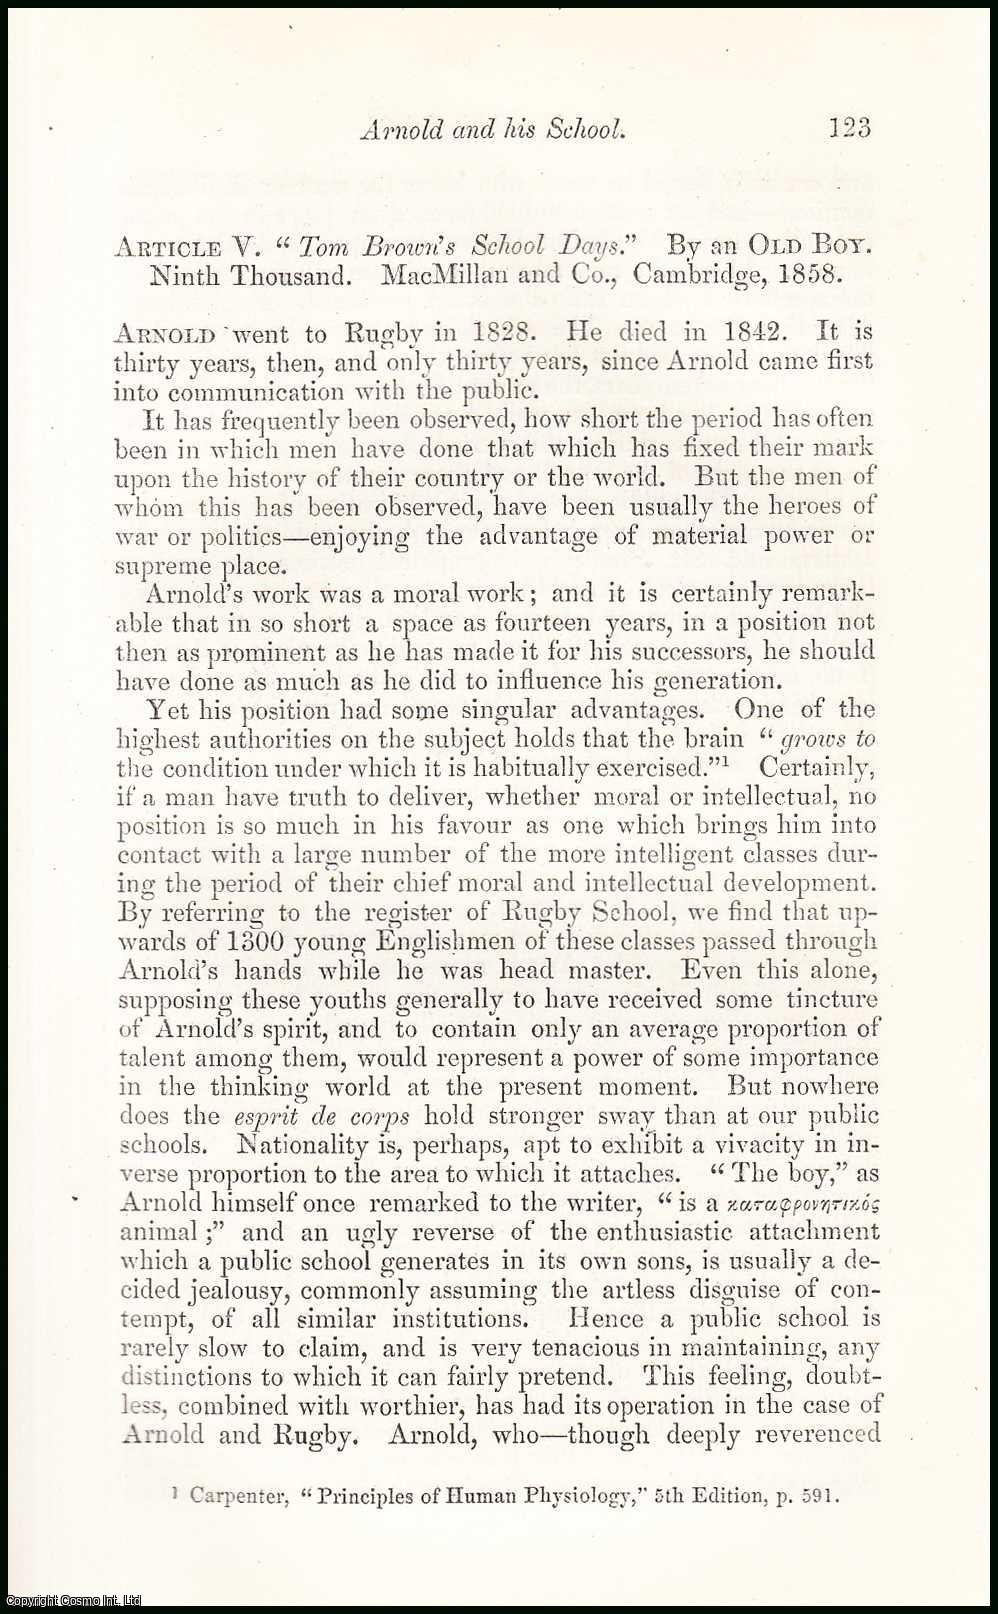 Thomas Burbidge - Arnold & his School. An uncommon original article from the North British Review, 1858.